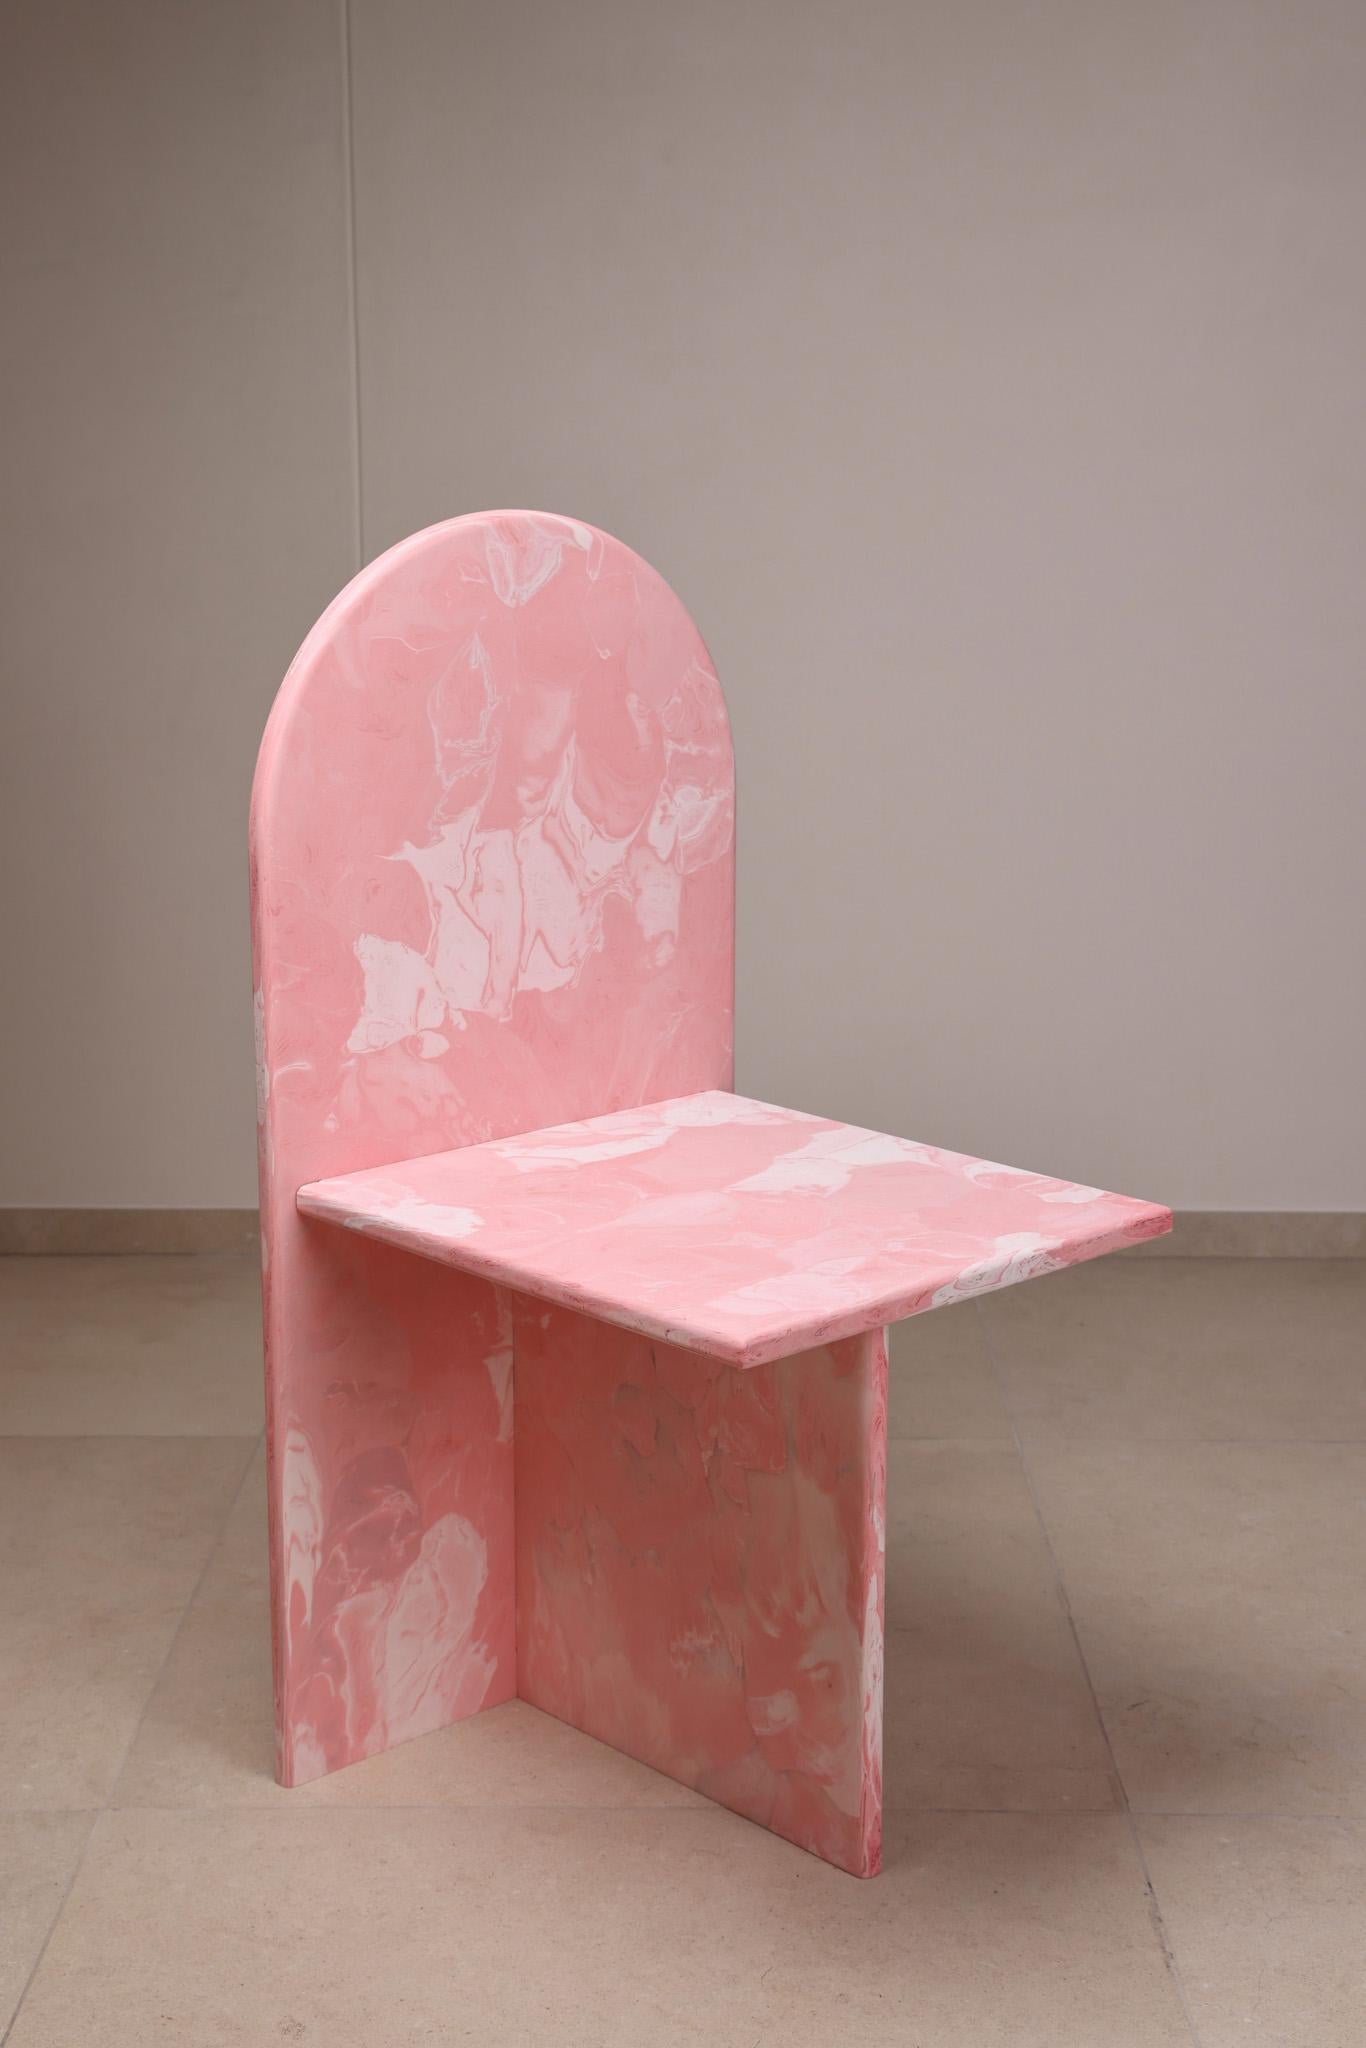 8x Contemporary Chairs Pink 100% Recycled Plastic Hand-Crafted by Anqa Studios For Sale 2